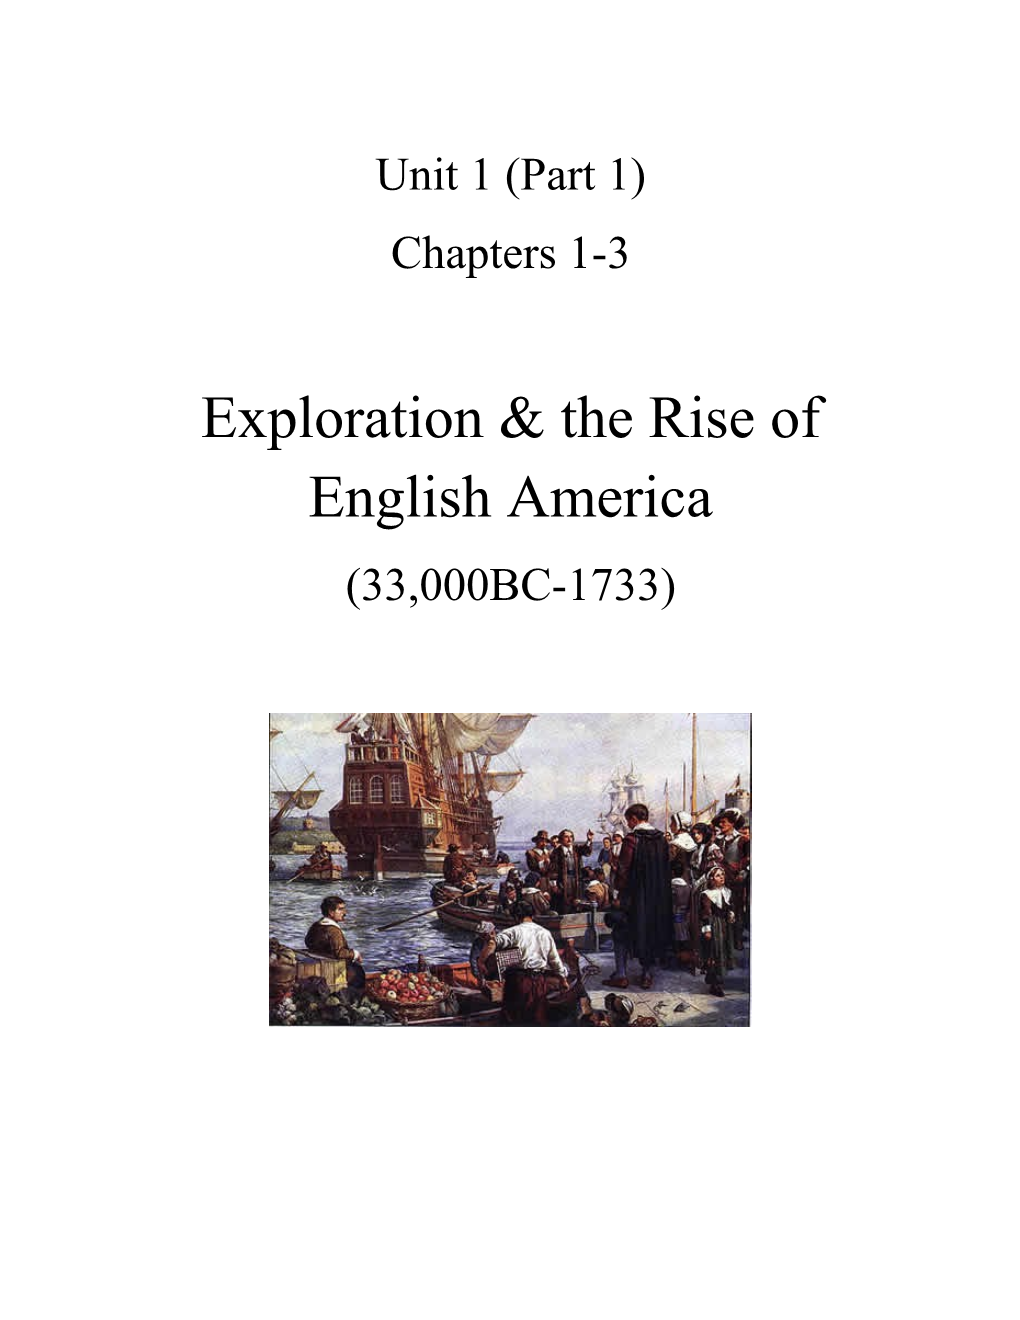 Exploration & the Rise of English America